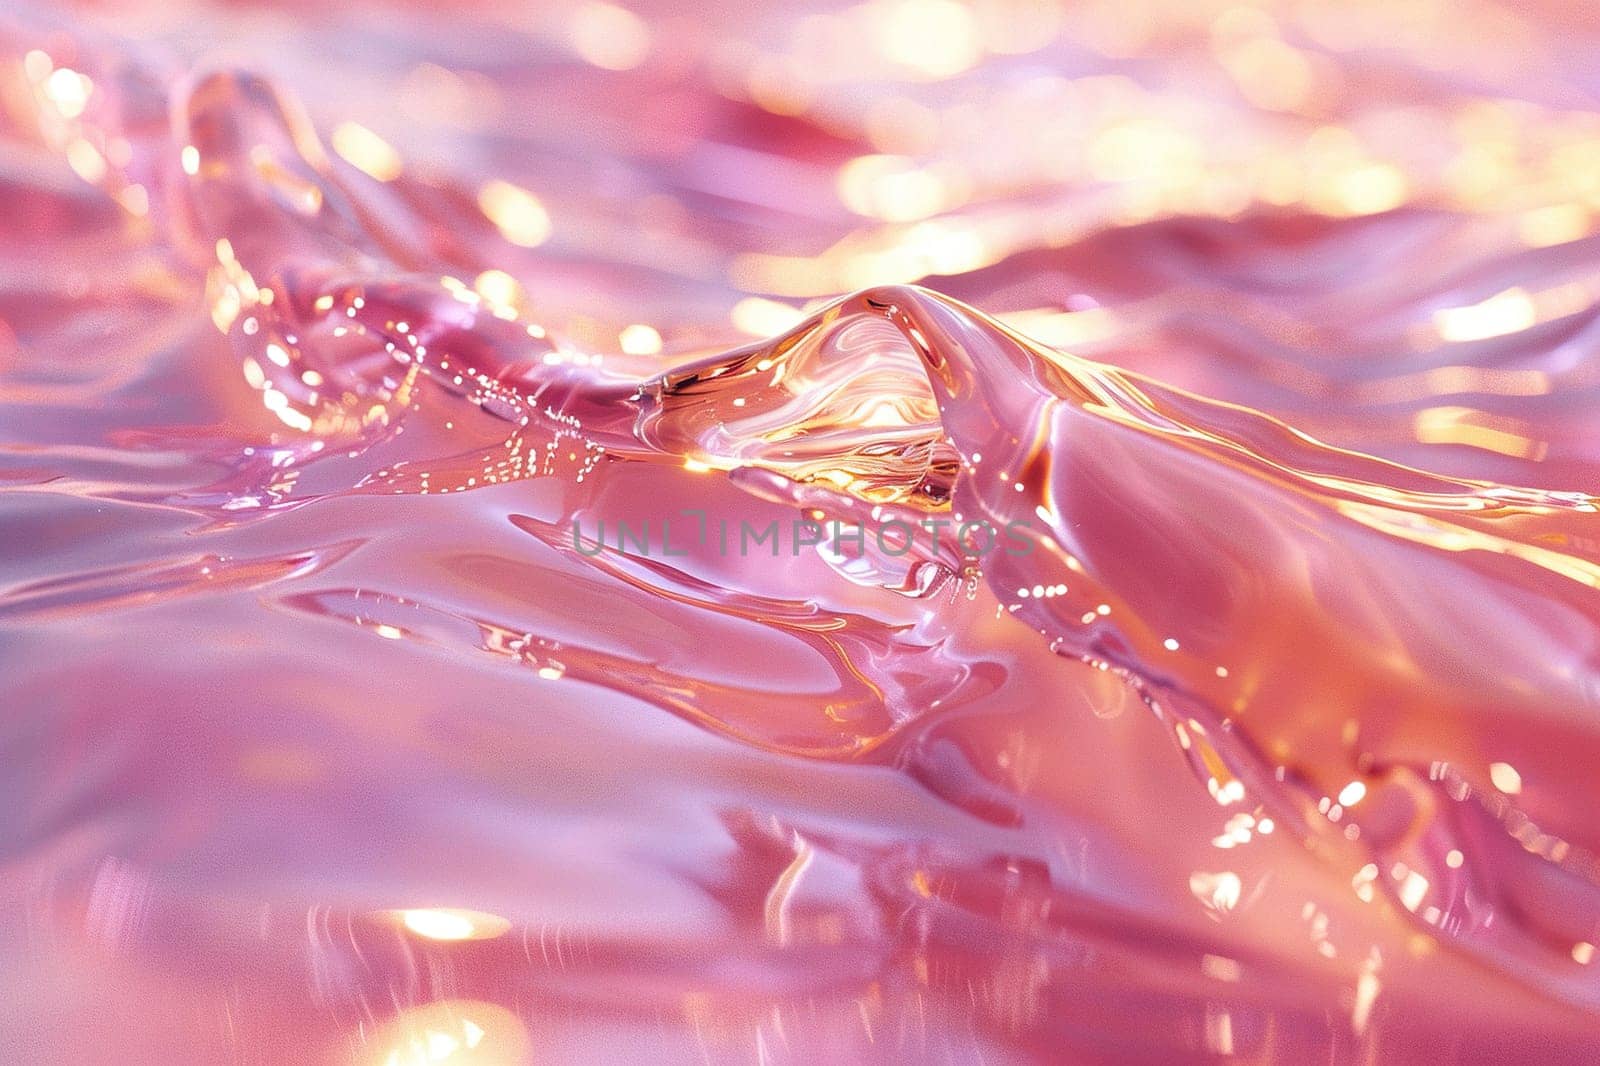 Abstract gel pink texture with wave. Background for design project, invitations or greeting cards, flyers, posters, wrapping paper.